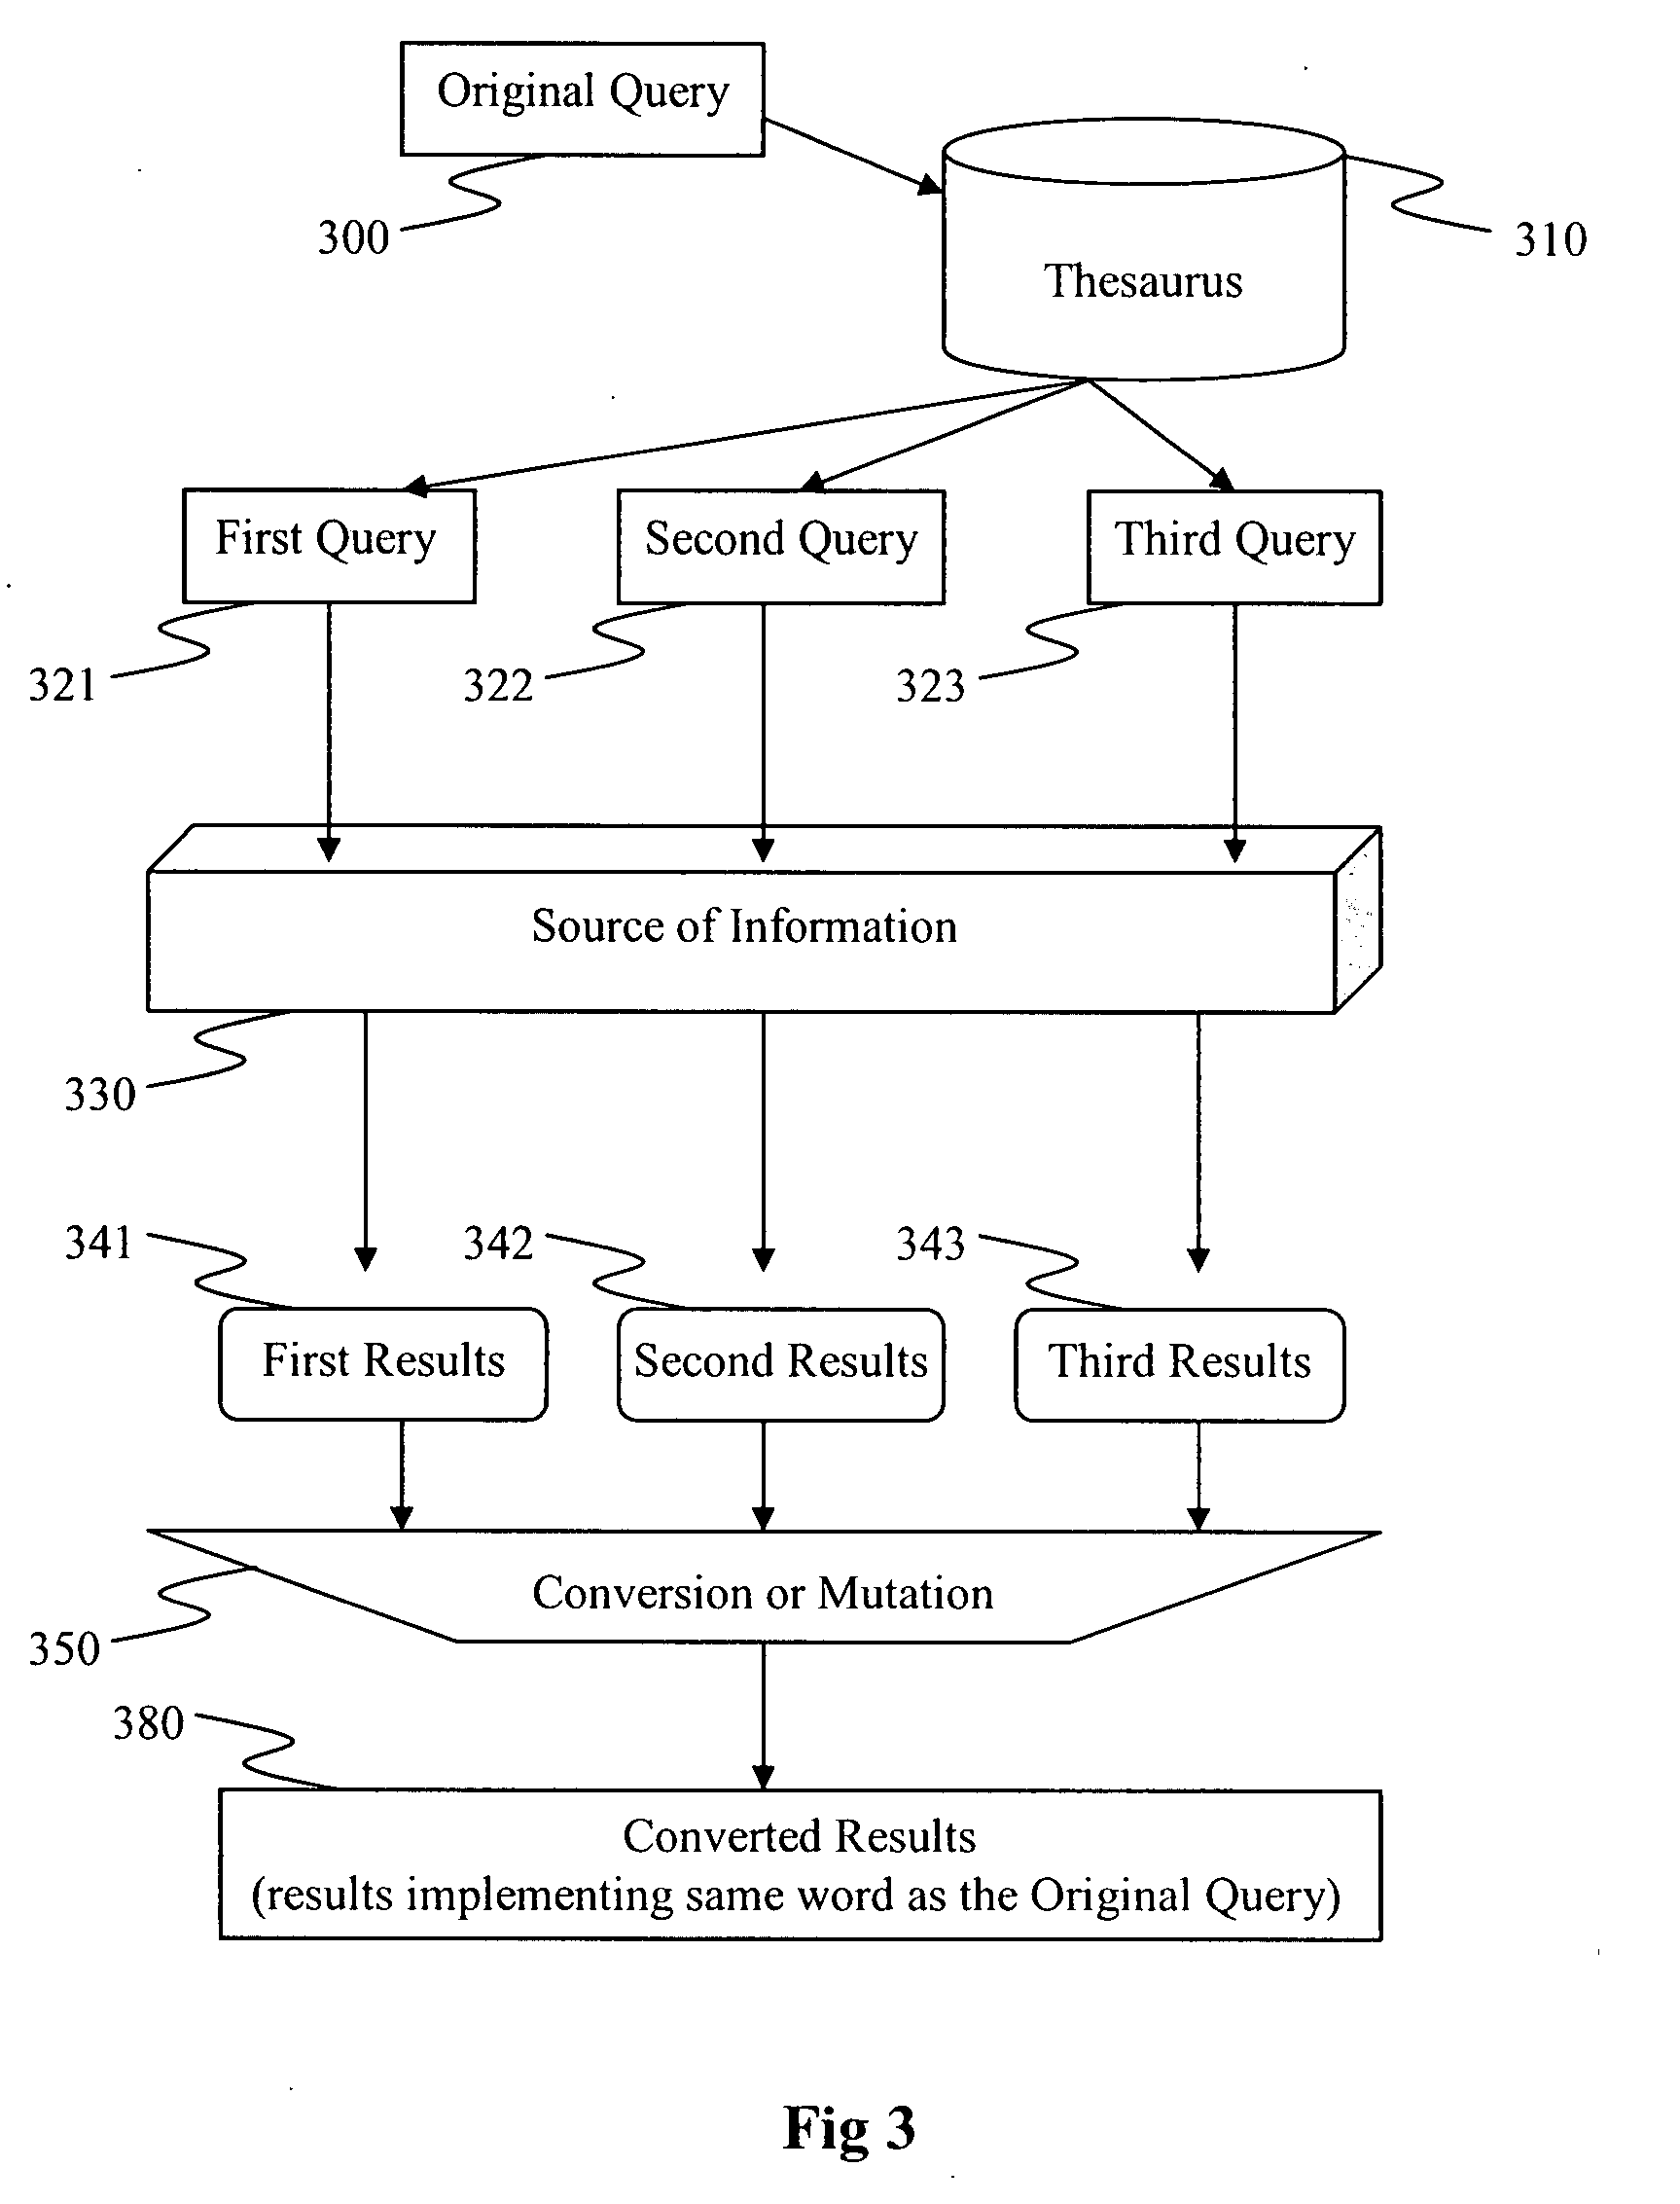 Methods for providing, displaying and suggesting results involving synonyms, similarities and others